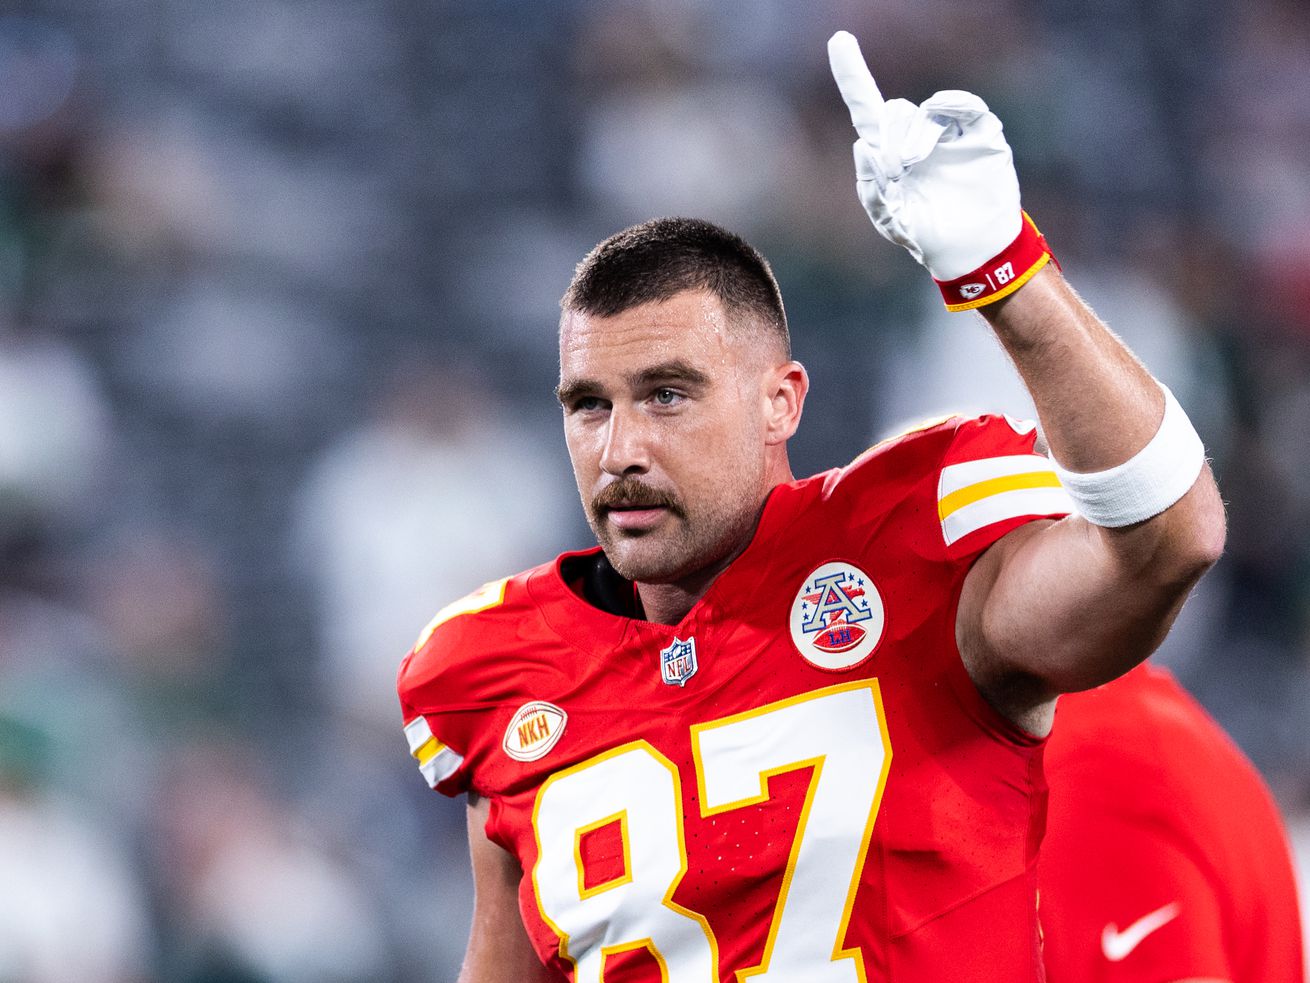 Travis Kielce, wearing a Kansas City Chiefs uniform number 87, walks off the field raising one white-gloved hand pointing to the sky.